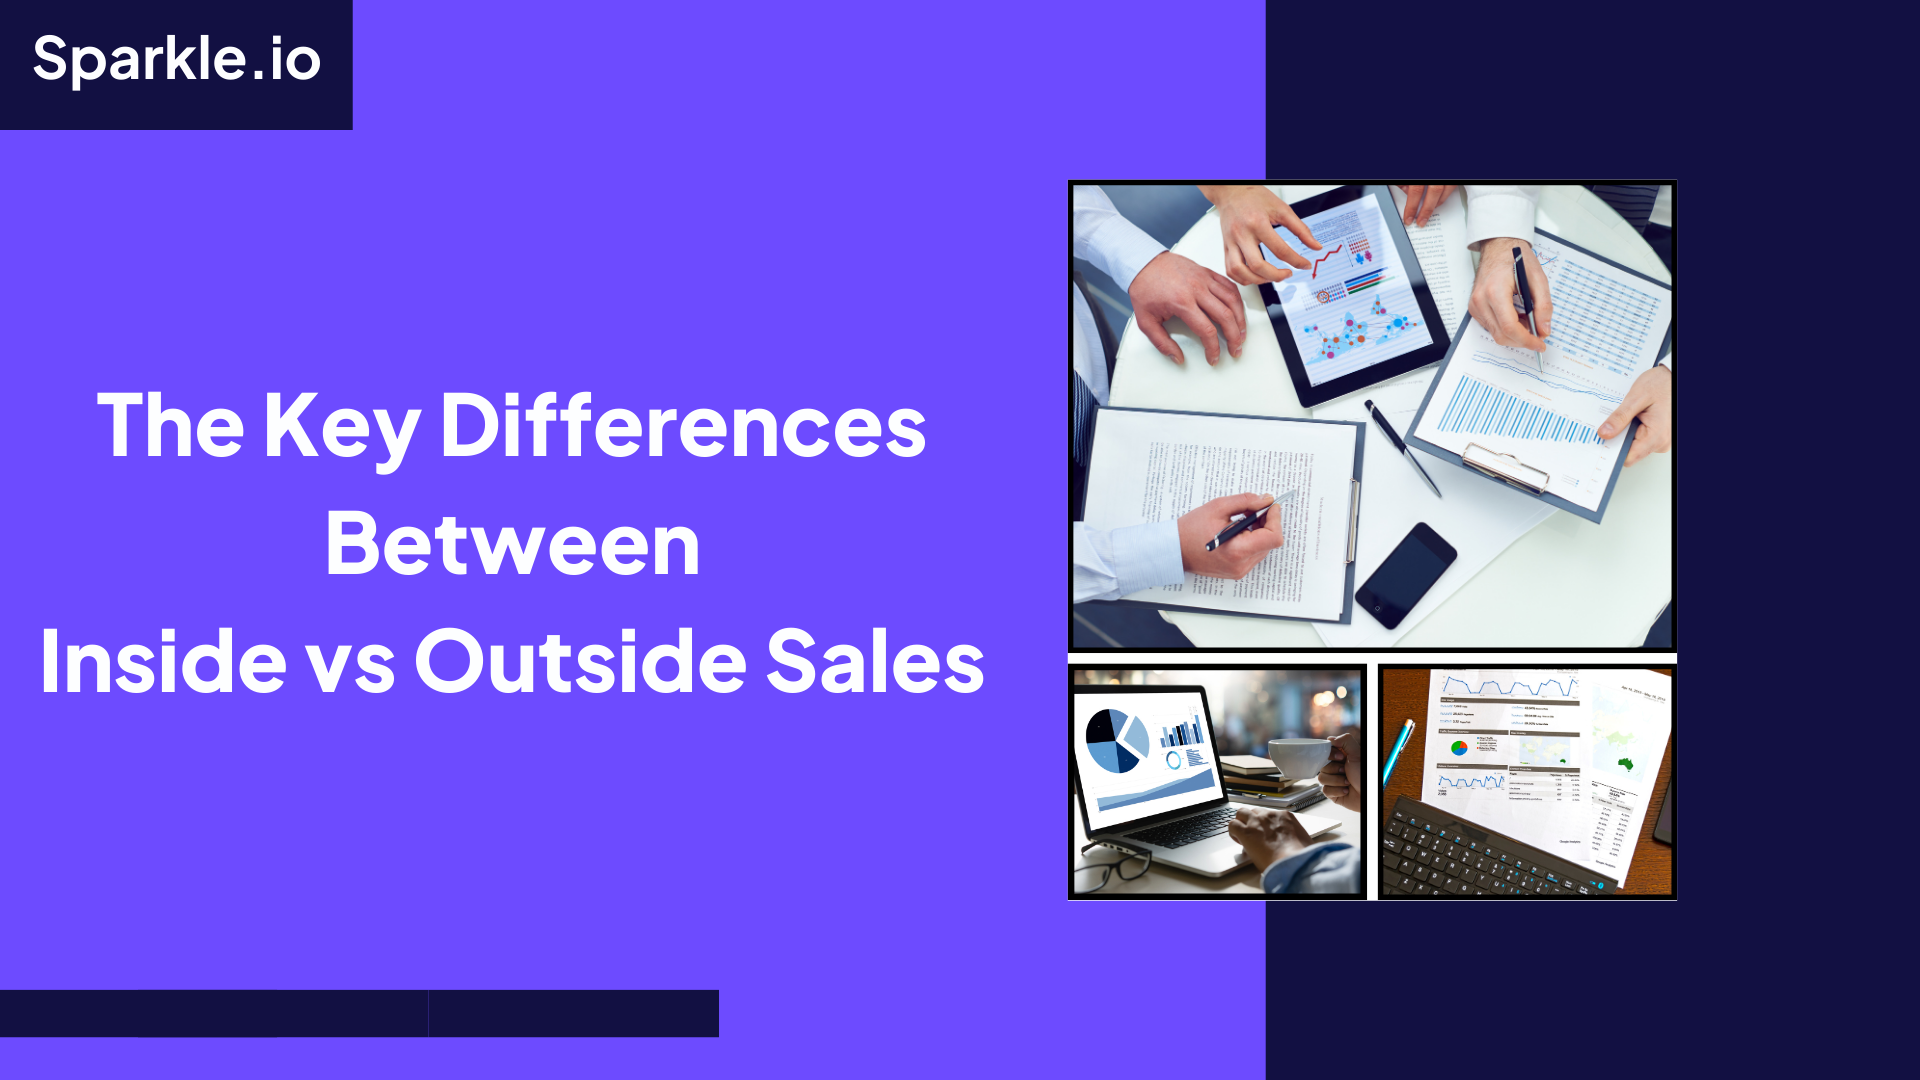 The Key Differences Between Inside vs Outside Sales